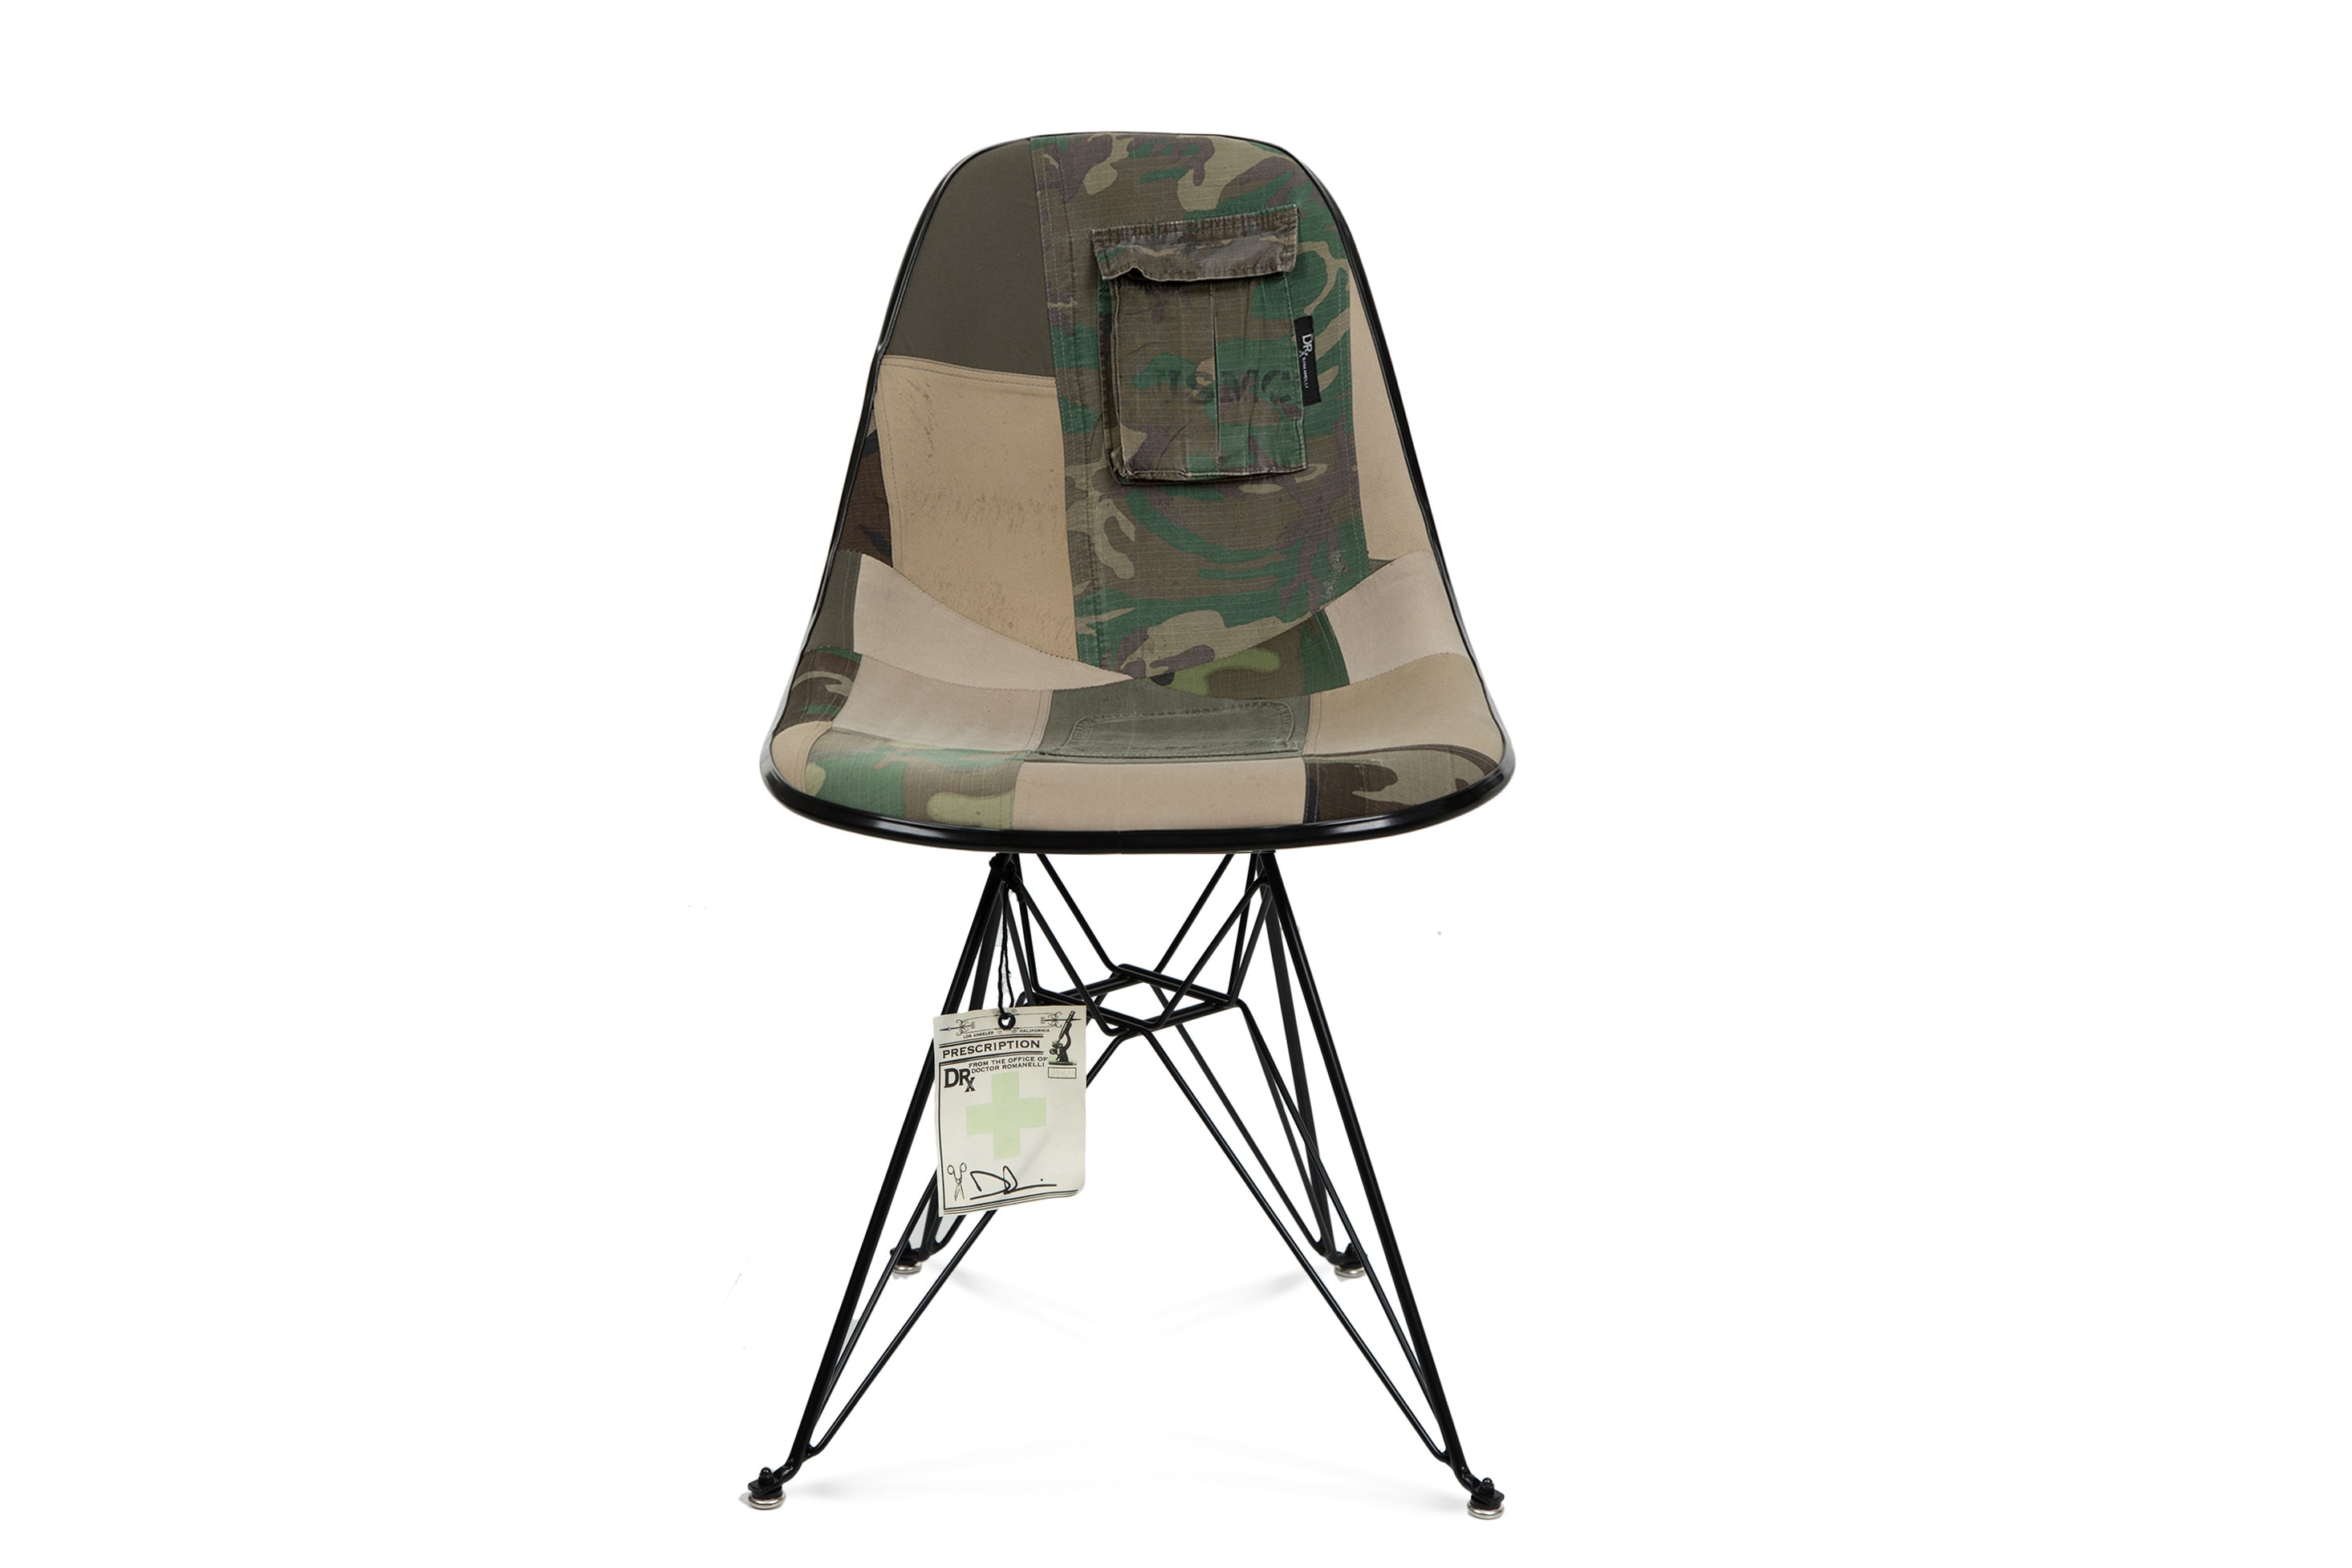 Modernica & DRx Romanelli Release Vintage Military Chair Collection Case Study Side Shell Eiffel chair